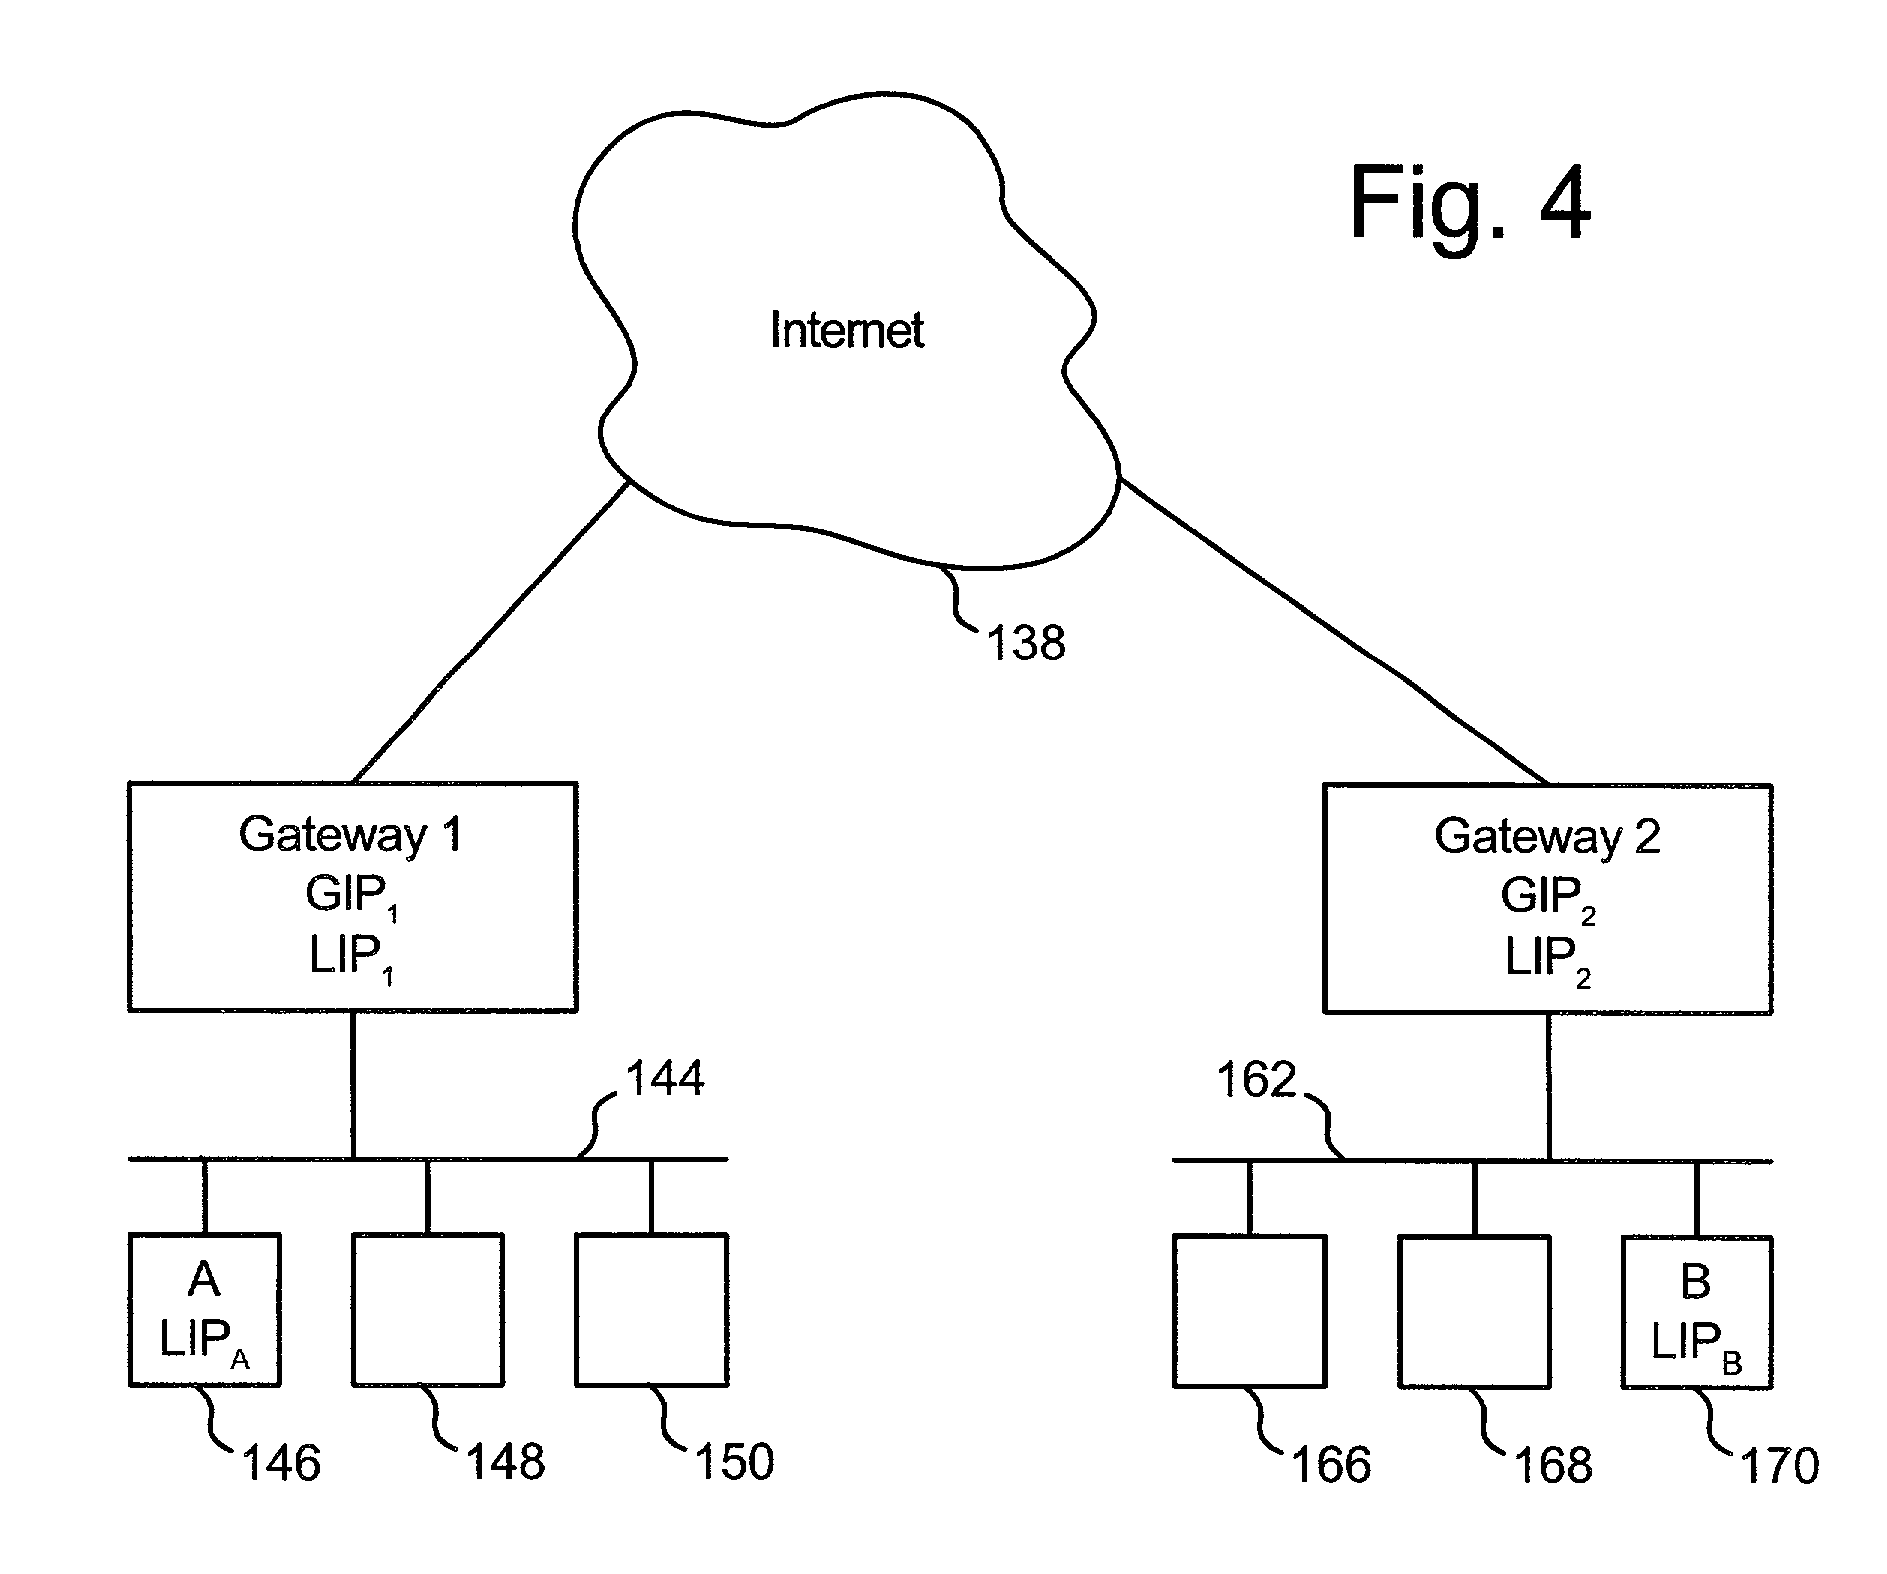 Communication using two addresses for an entity